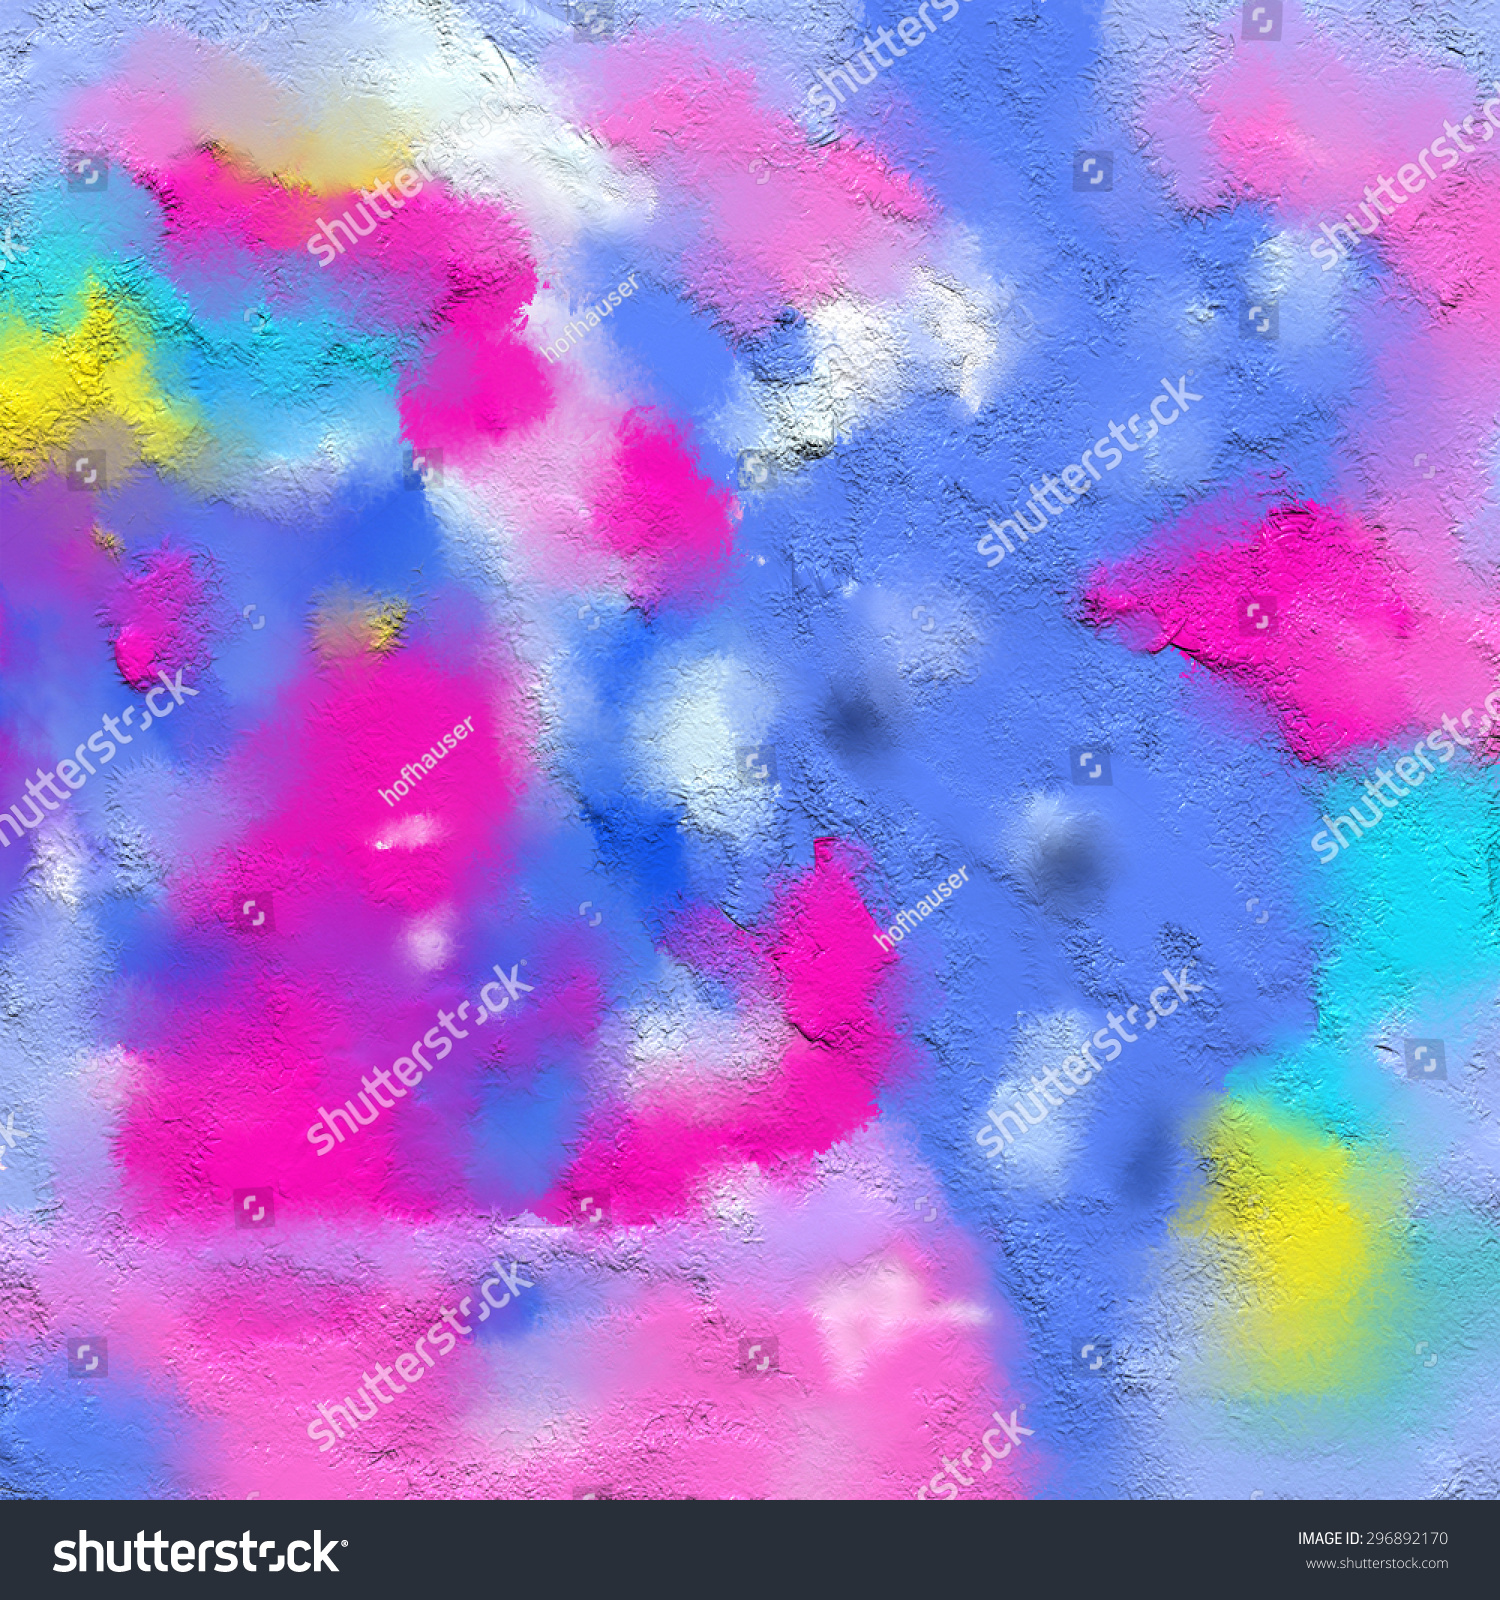 Abstract Art Backgrounds,Colorful Canvas Stock Photo 296892170 ...